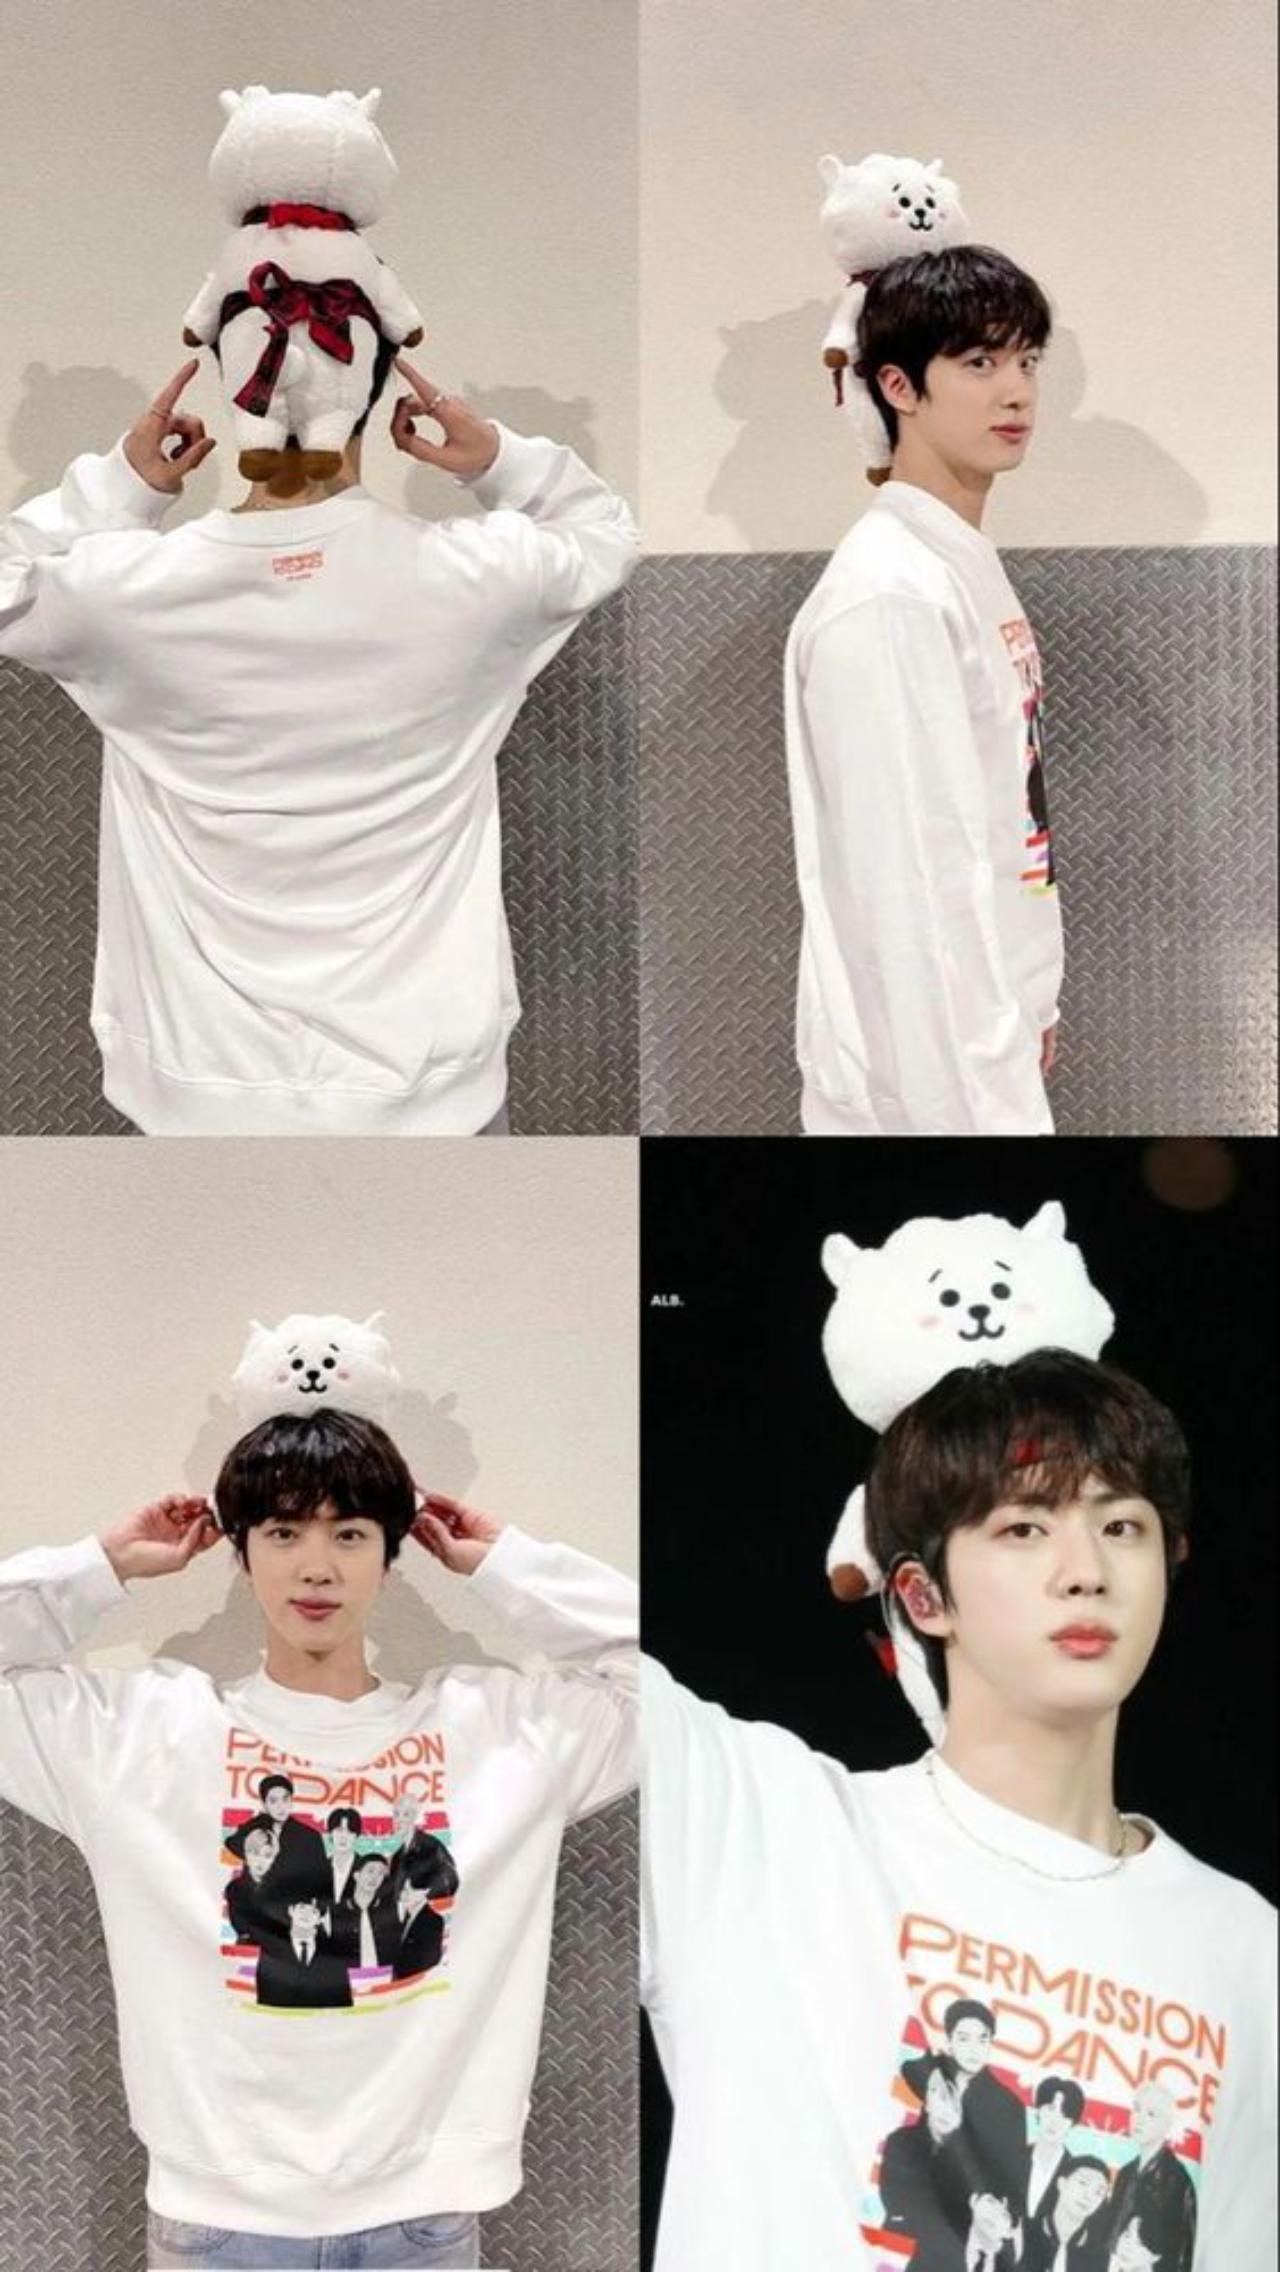 The saga of 'extra' concert ensembles continues! During BTS's Permission to Dance concerts in 2021, Jin surprised ARMY each day by serving up an extra dose of 'aegyo' (cuteness). Here, Jin strapped on a plushie of his self-designed BT21 character, RJ to his head